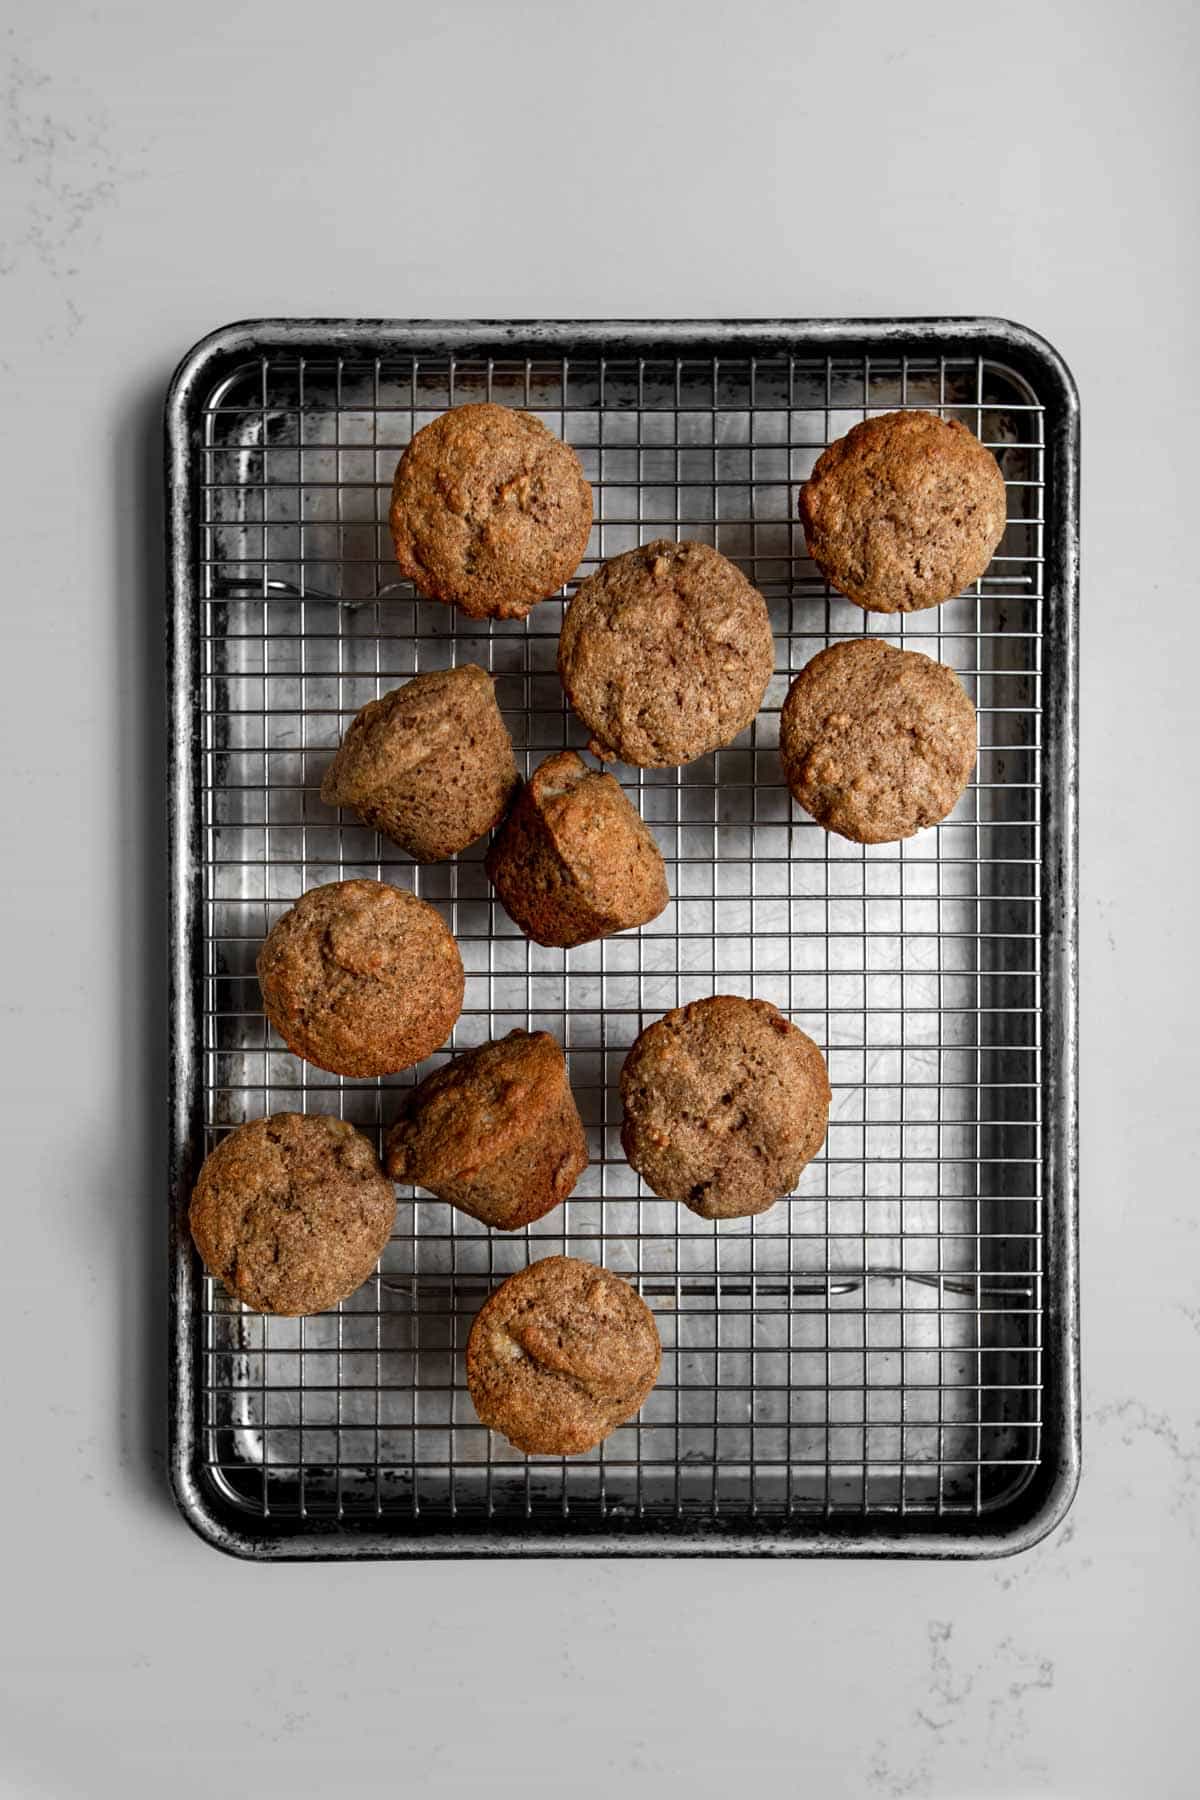 multtiple mini banana muffins out of the oven and cooling on a wire rack.